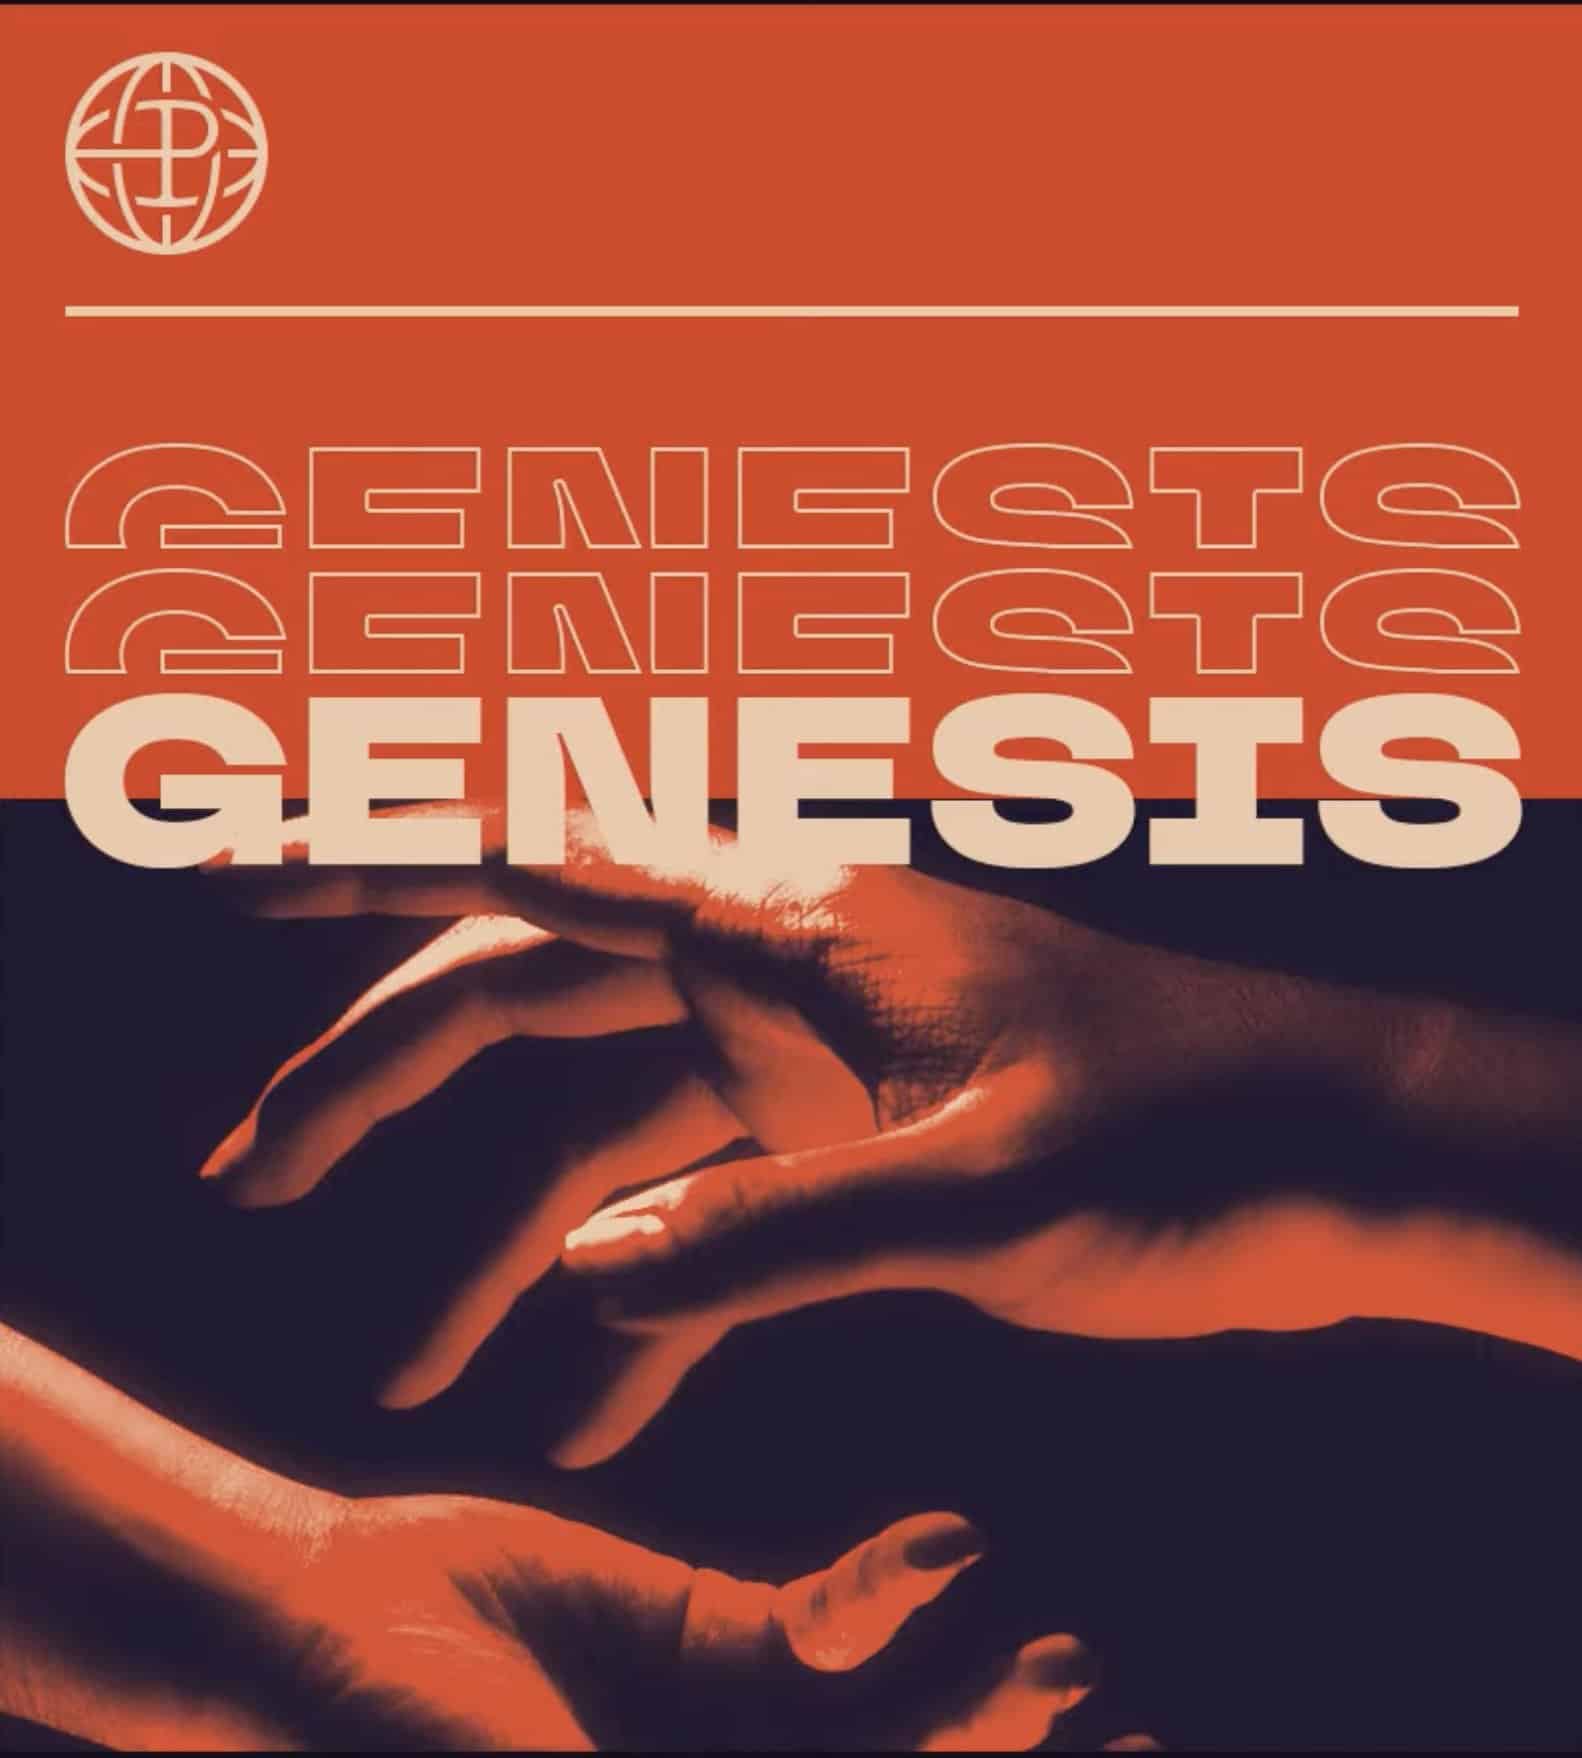 Two hands reaching with the word 'Genesis' repeated above